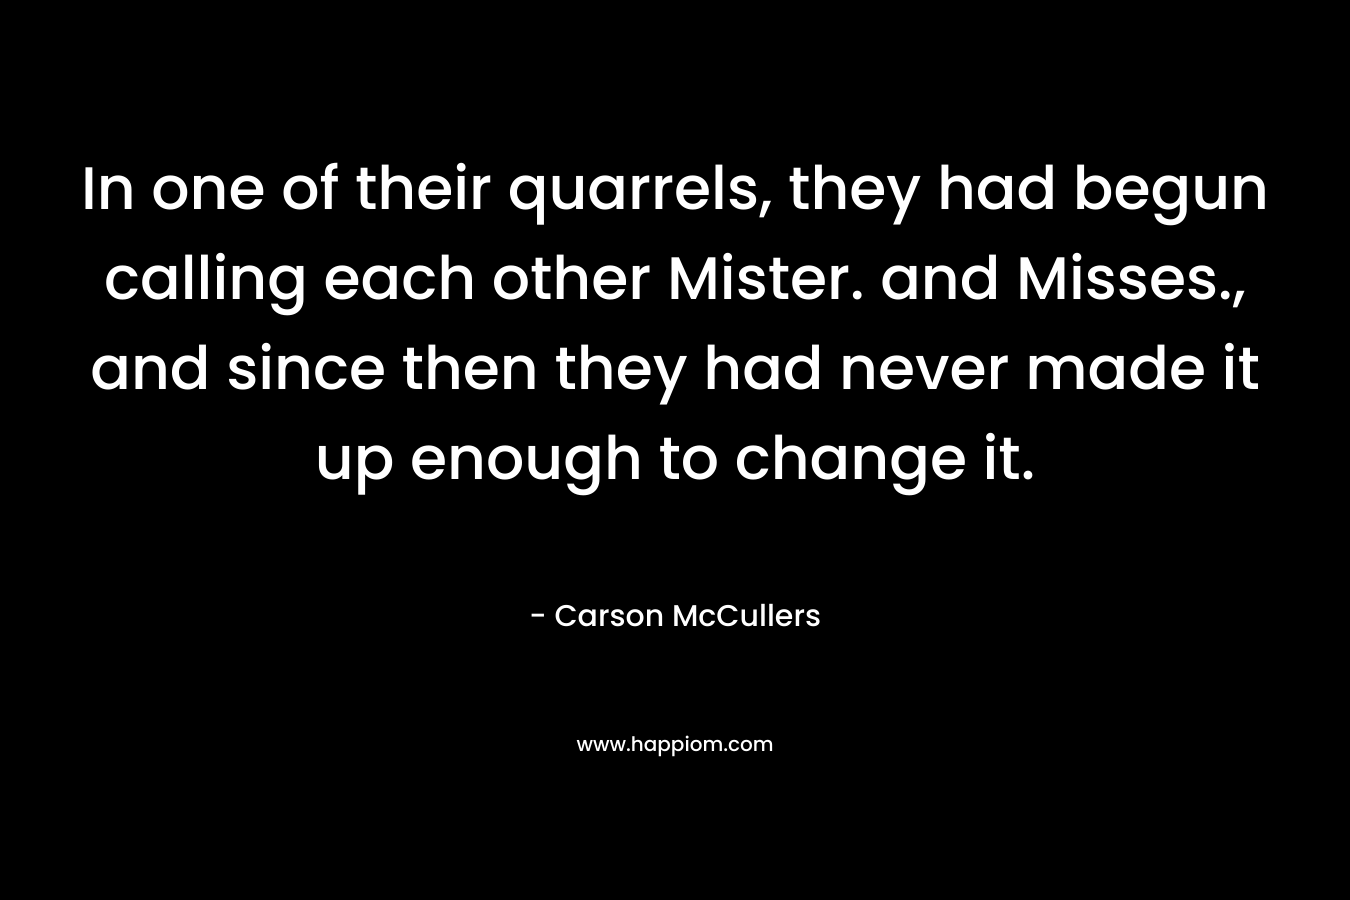 In one of their quarrels, they had begun calling each other Mister. and Misses., and since then they had never made it up enough to change it. – Carson McCullers